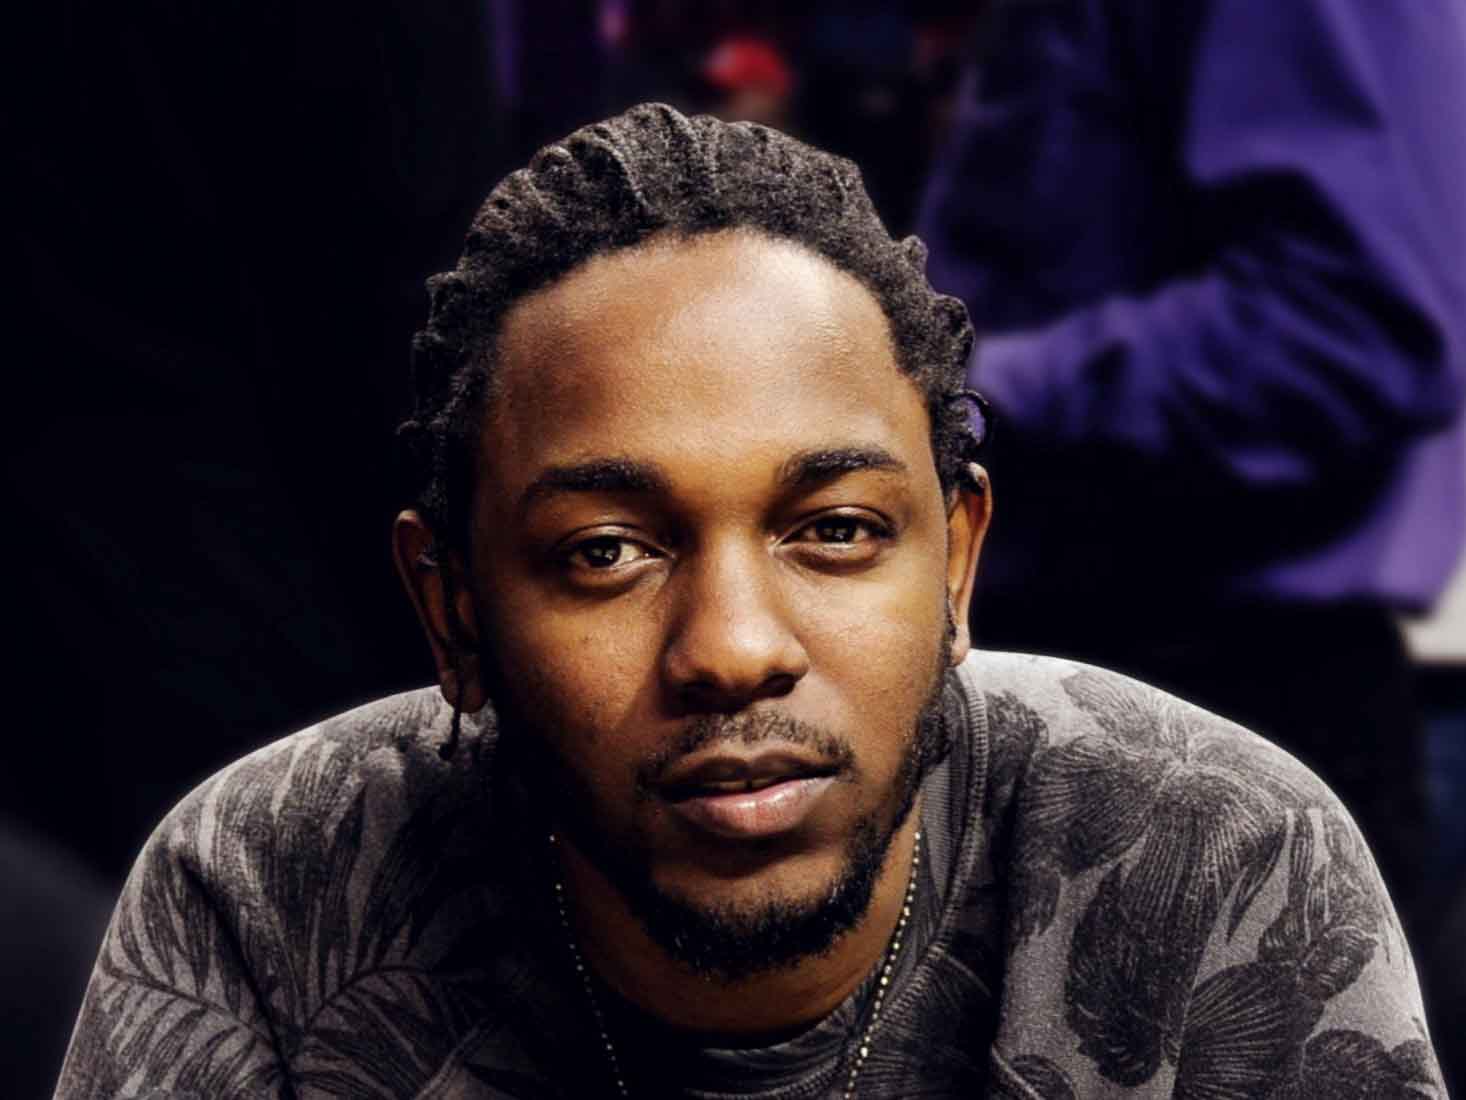 Kendrick Lamar Duckworth (born June 17, 1987) is an American rapper, songwriter, and record producer. He is regarded as one of the most skillful ...